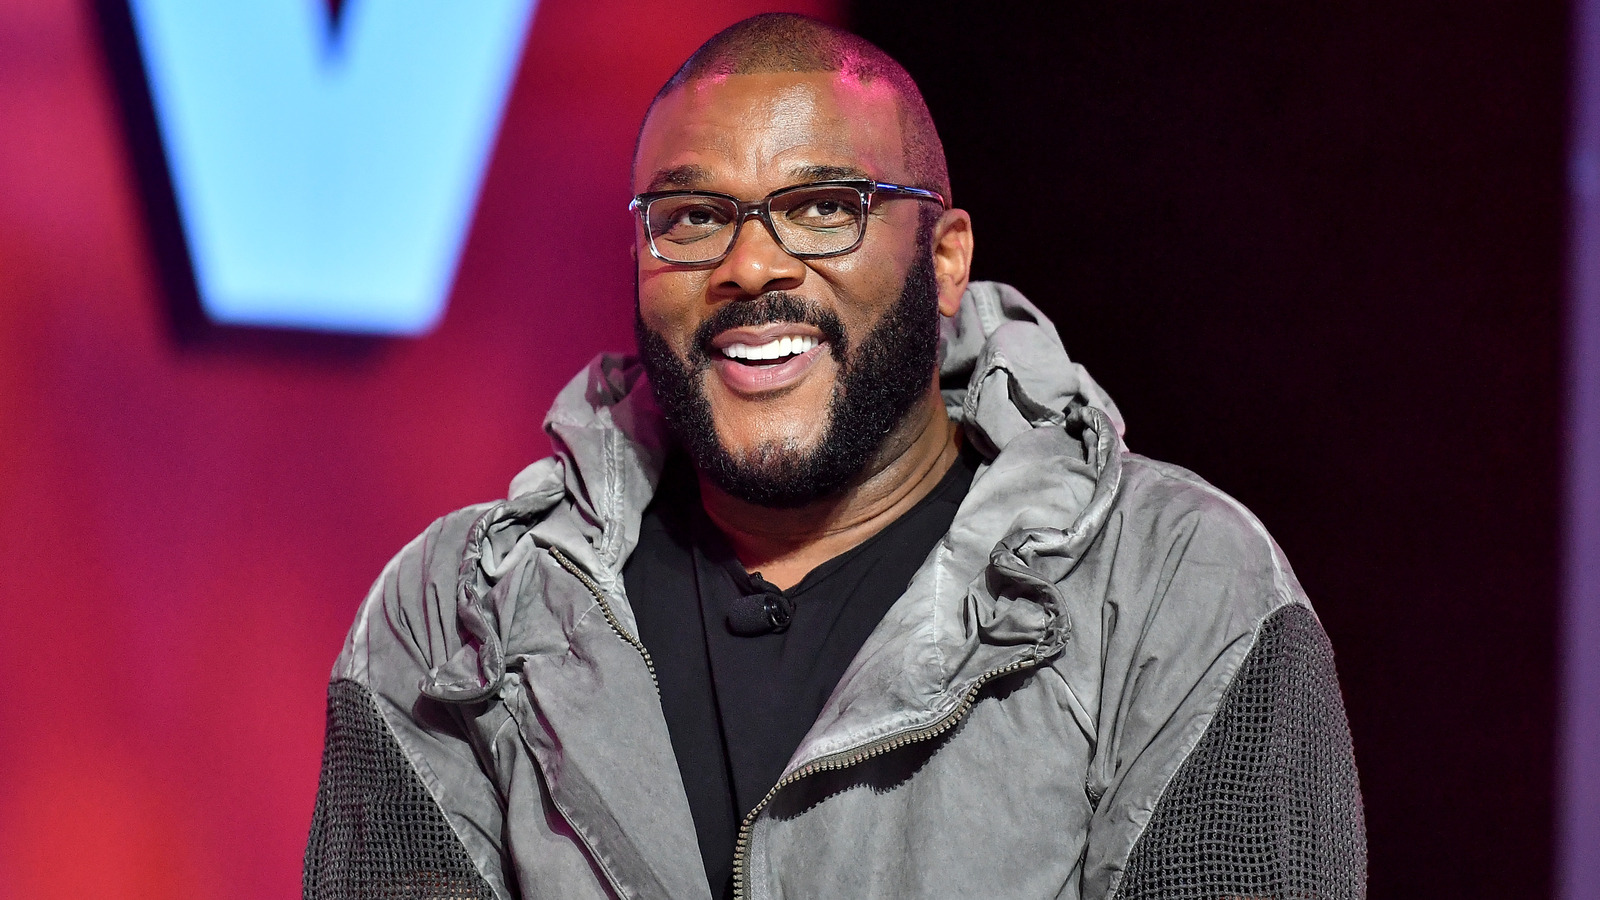 Smiling Tyler Perry wearing a gray jacket and eyeglasses